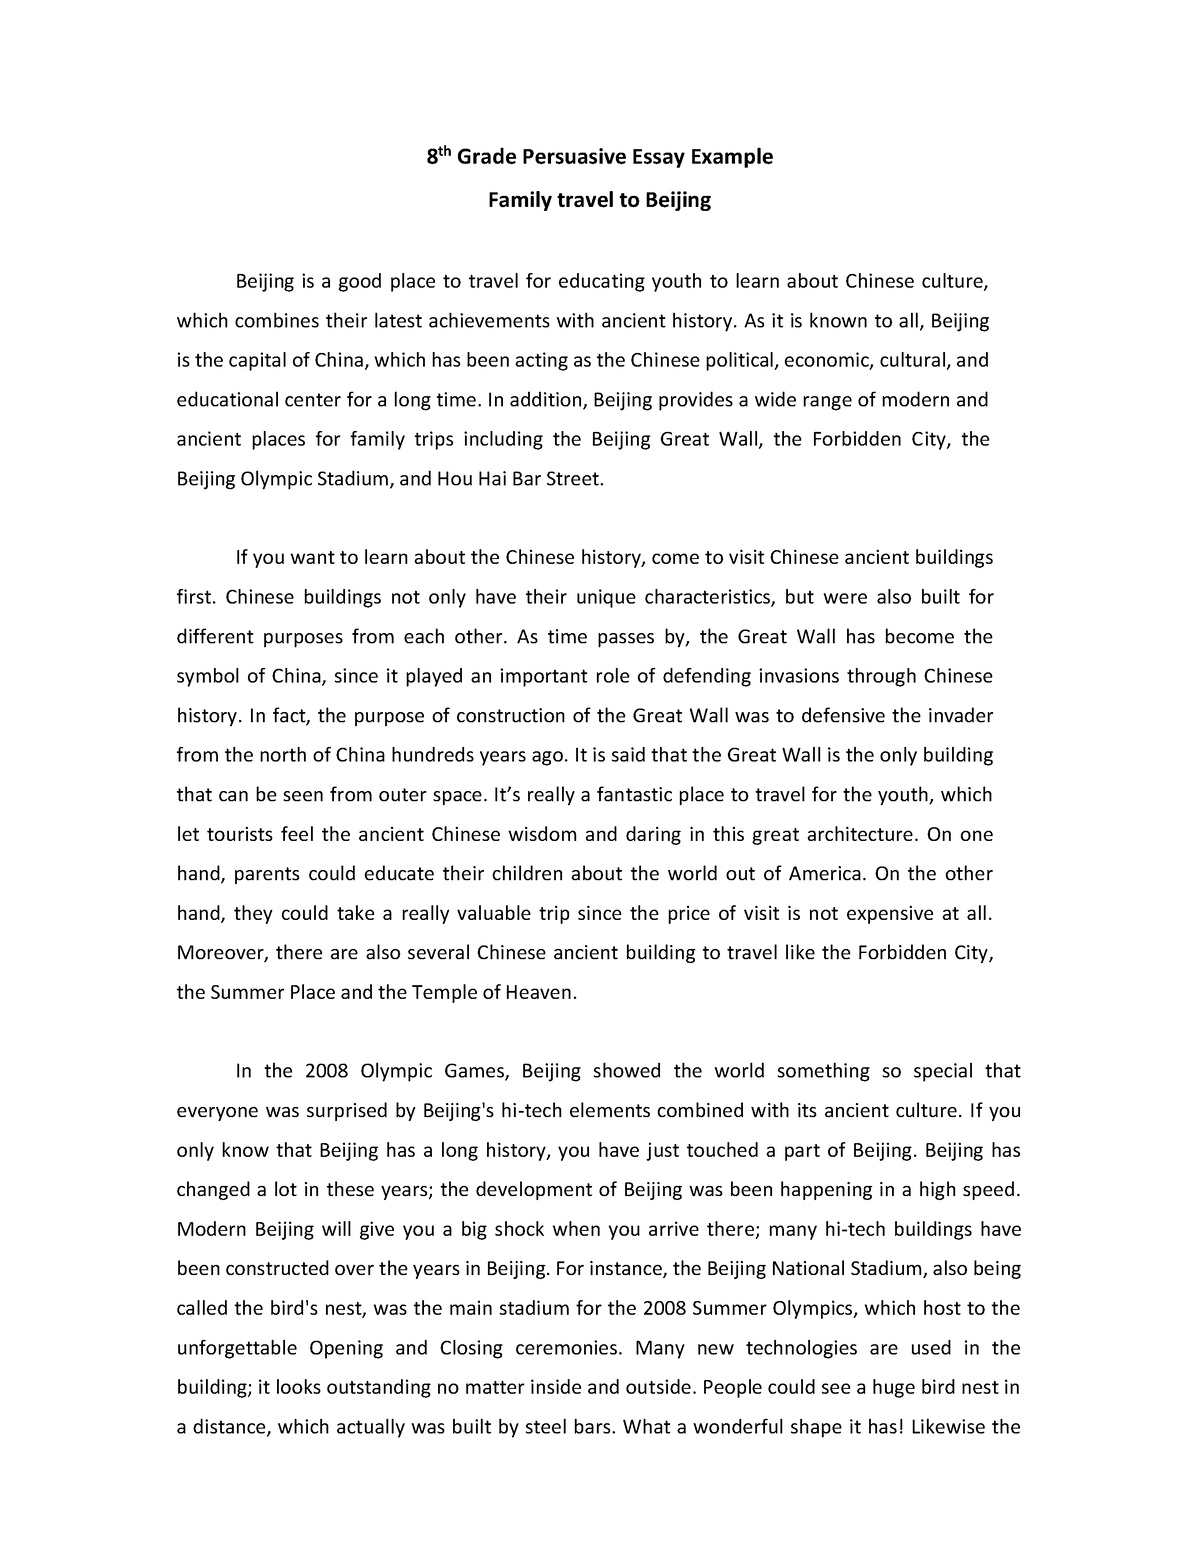 persuasive essay about family love